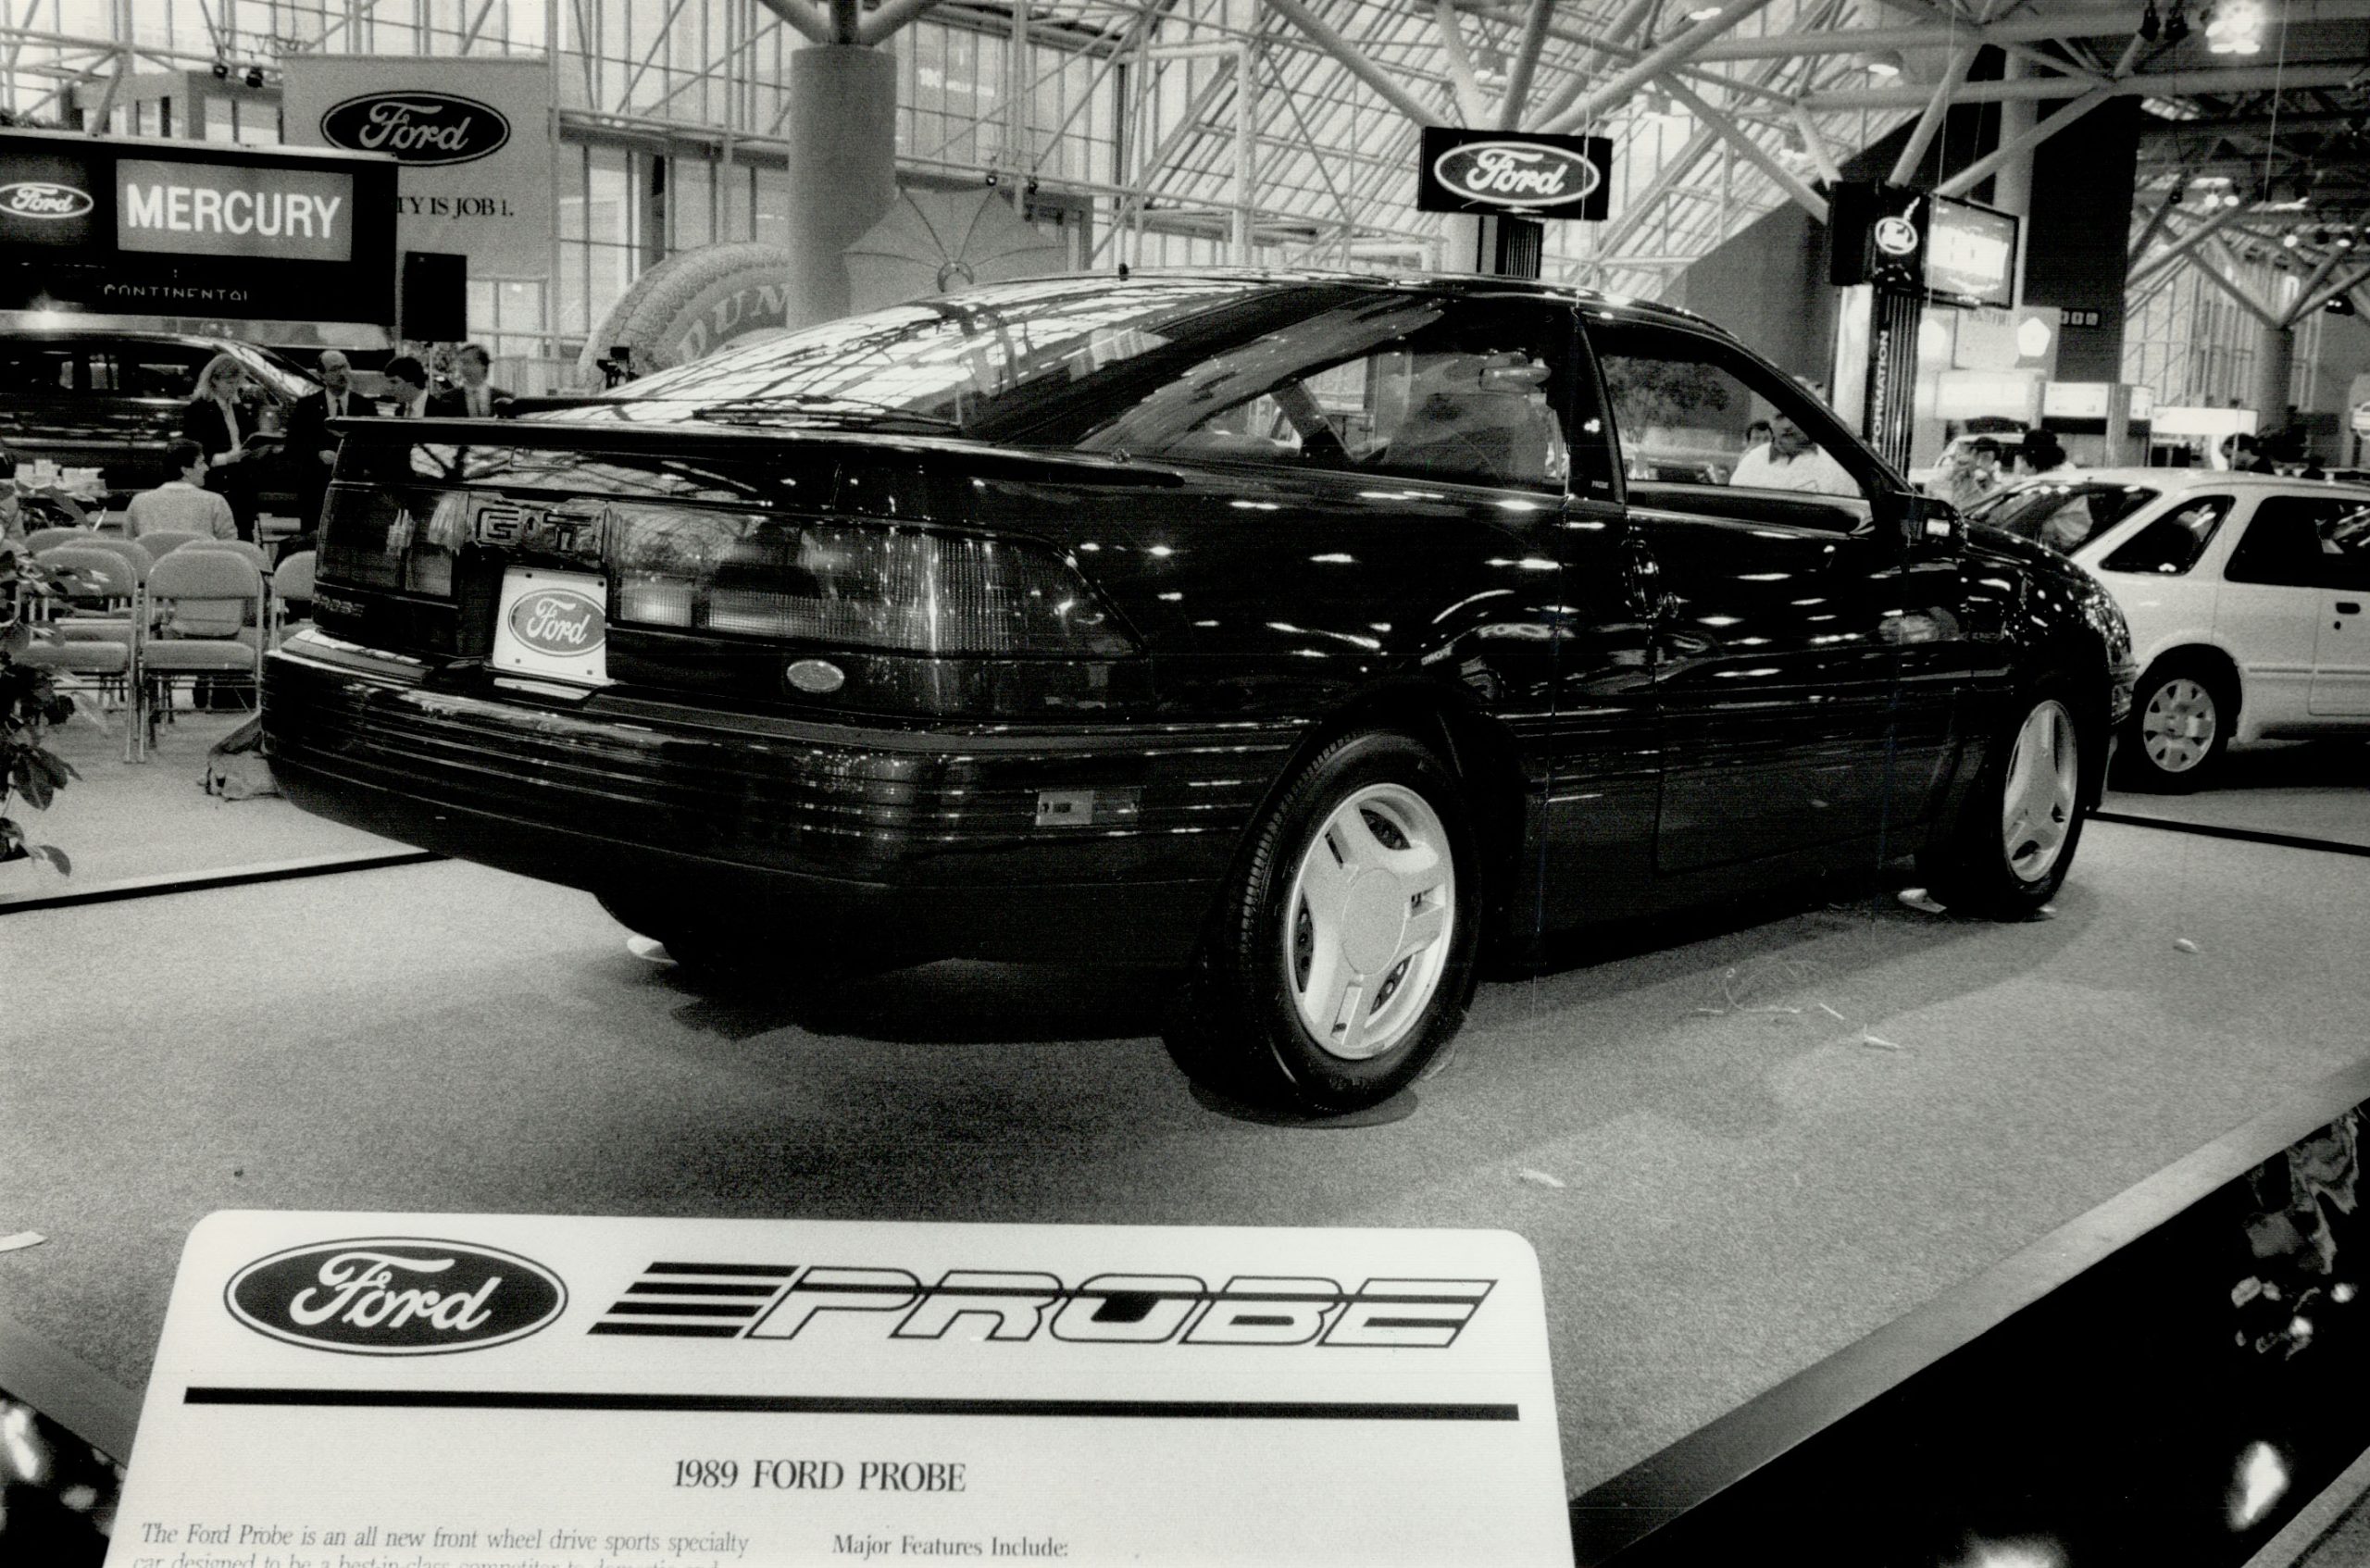 A Ford Probe being unveiled